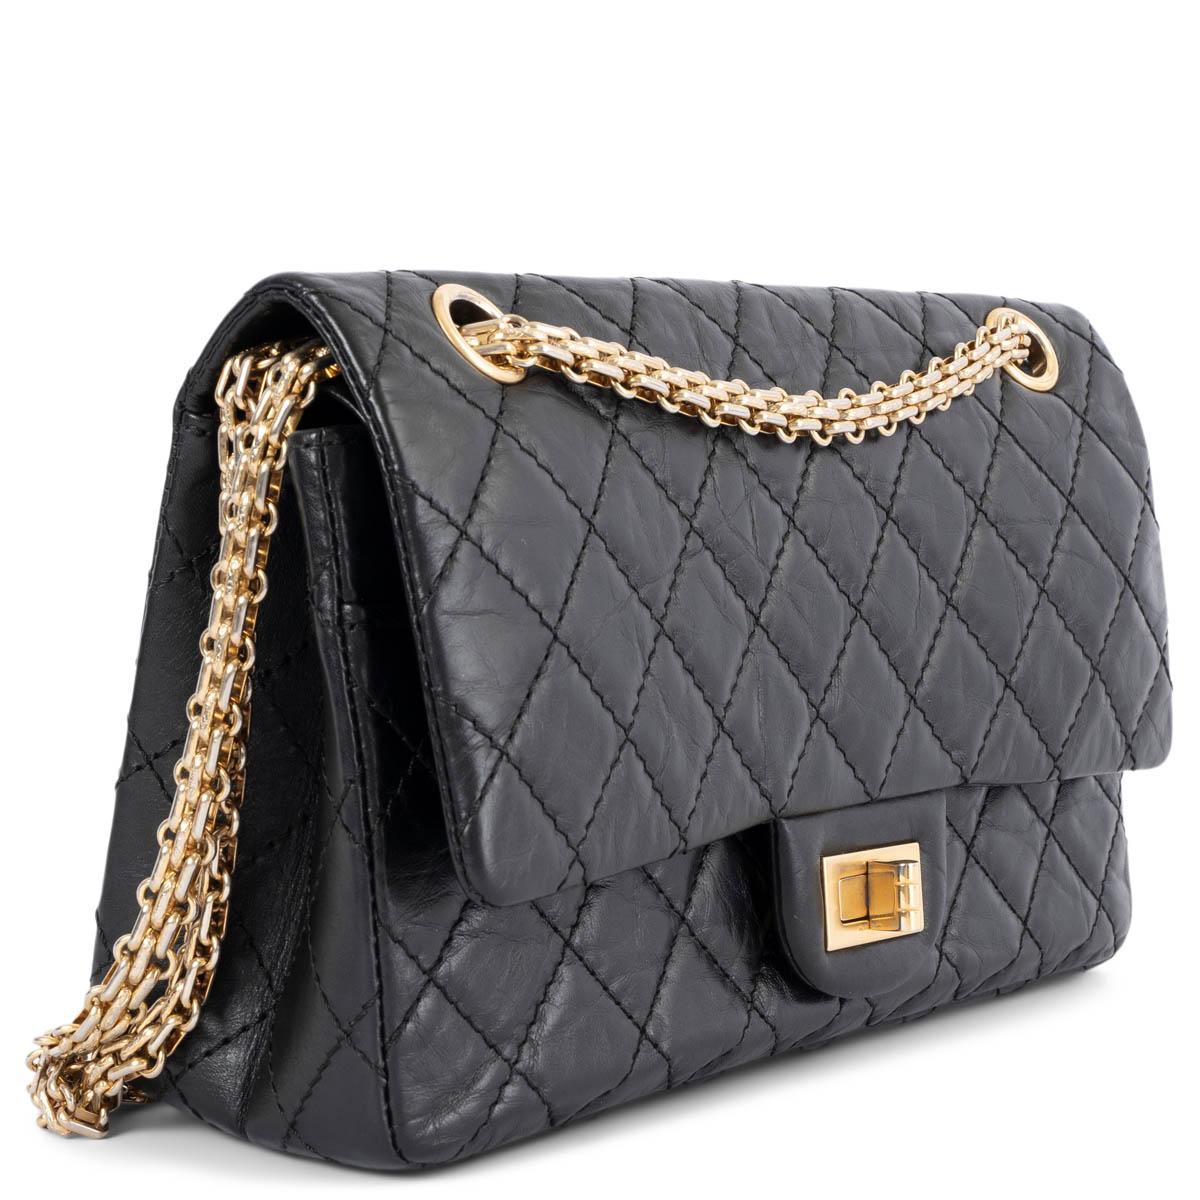 100% authentic Chanel 2.55 Reissue 225 double flap bag in black aged calfskin featuring classic diamond quilted stitchings. Opens with a turn-lock to a black and burgundy smooth calfskin interior with two patch pockets and one lipstick pocket